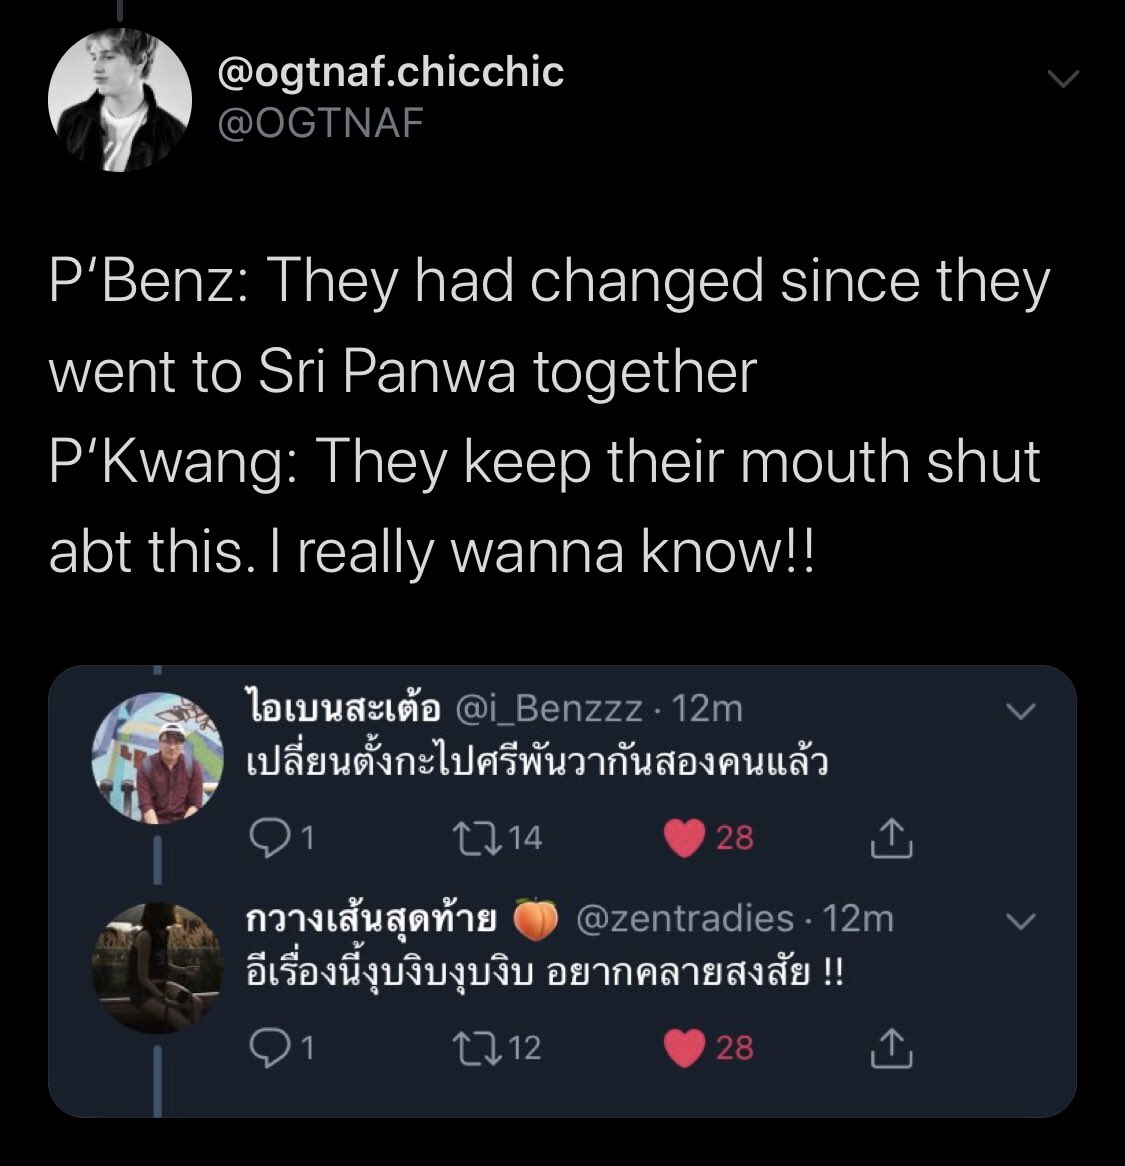 also putting this here they never told their friends about sri panwa cr: OGTNAF